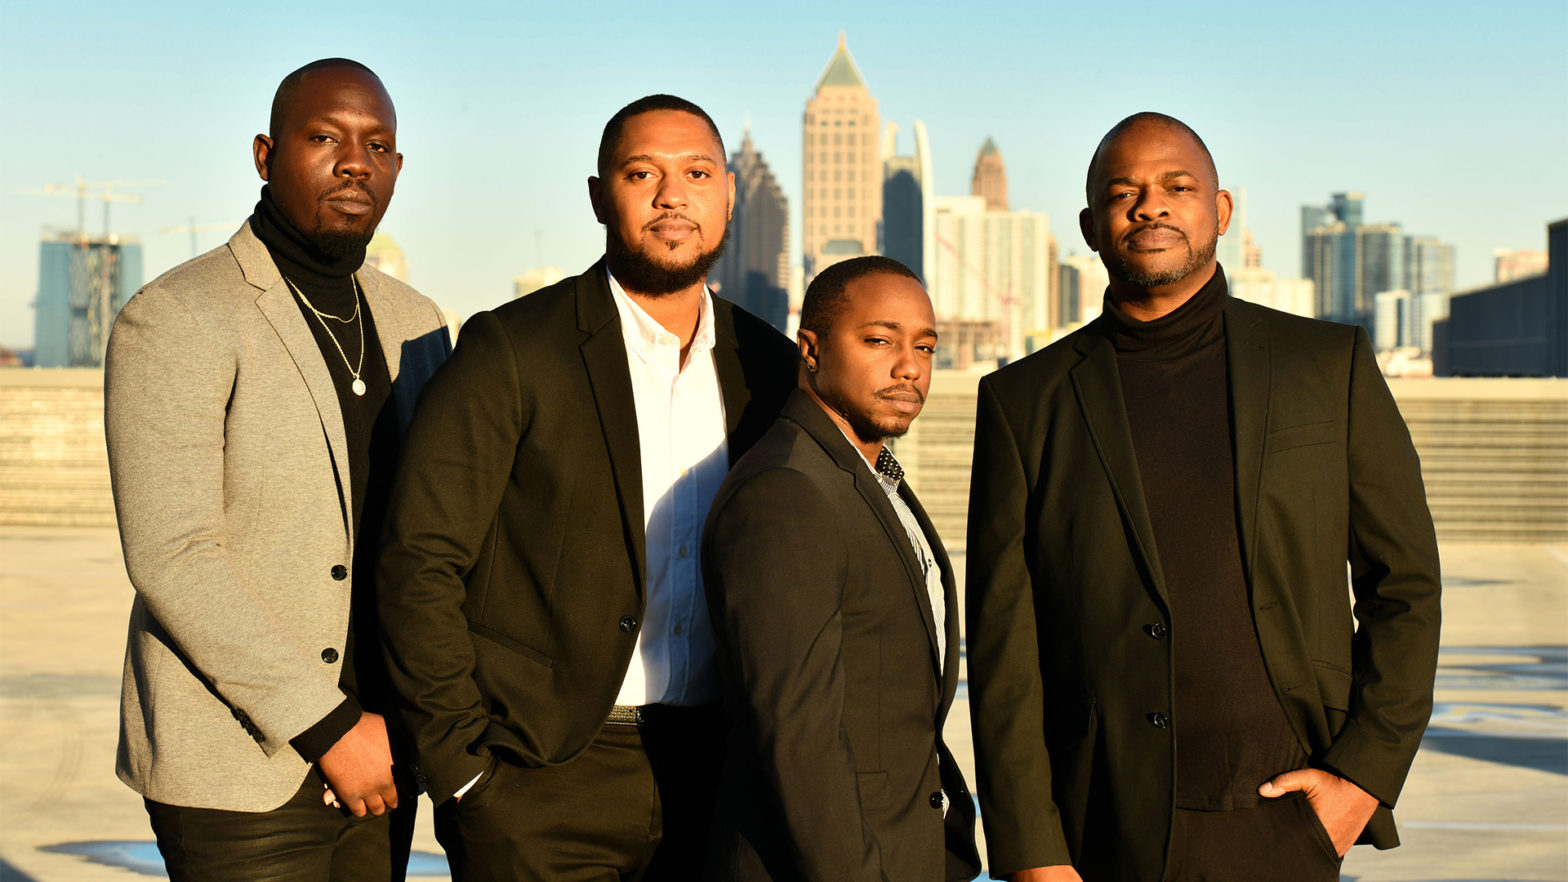 Meet The Men Of Culture Wireless, The Black-Owned Internet Service Provider Empowering The Community